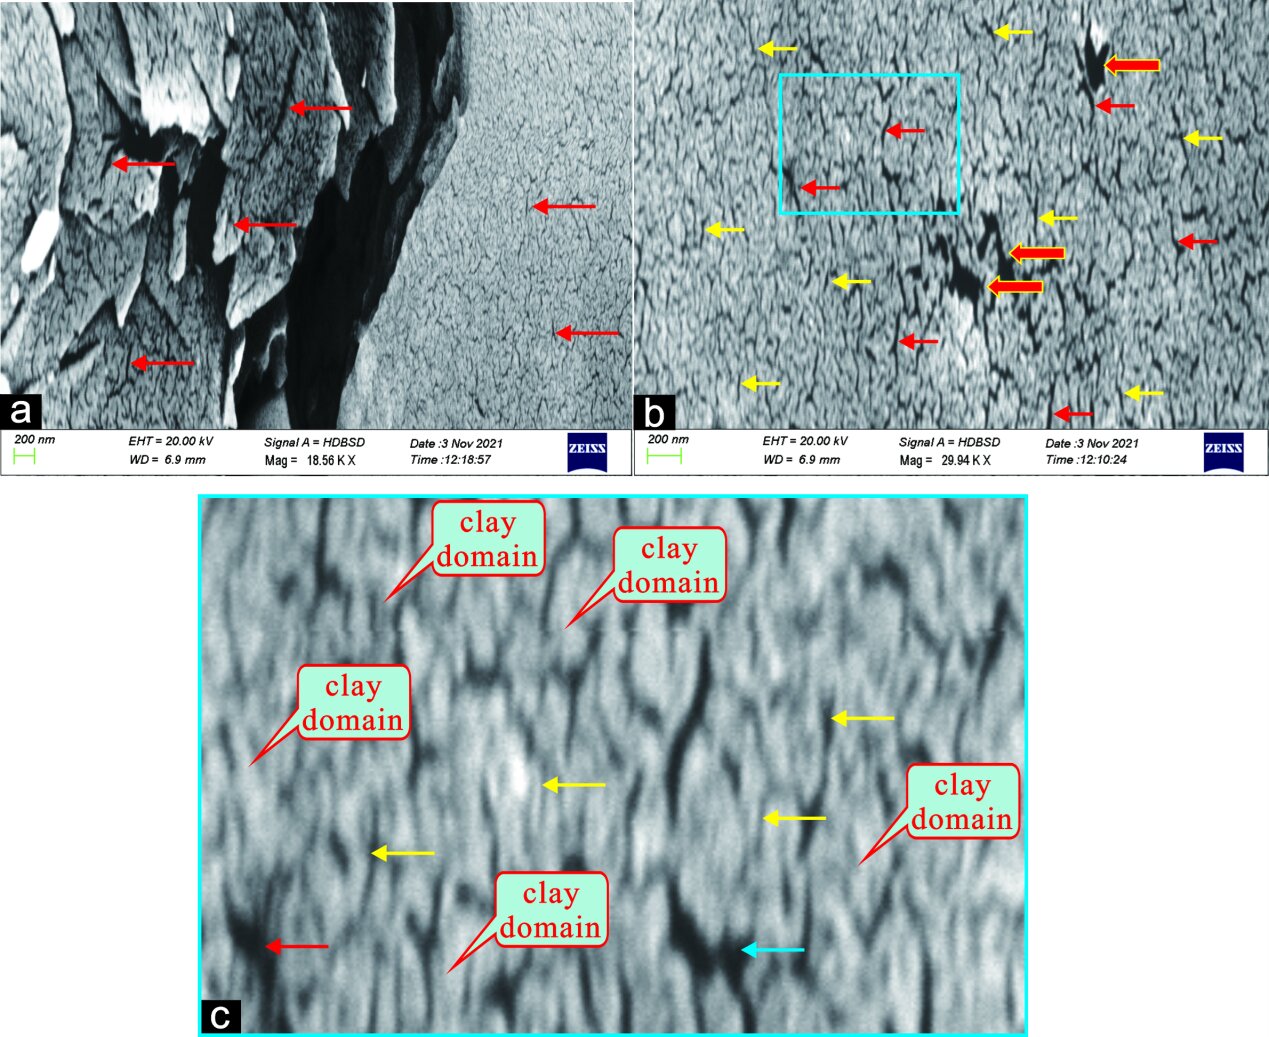 #New study explores the nanoscale properties of the Gulong shale oil reservoir